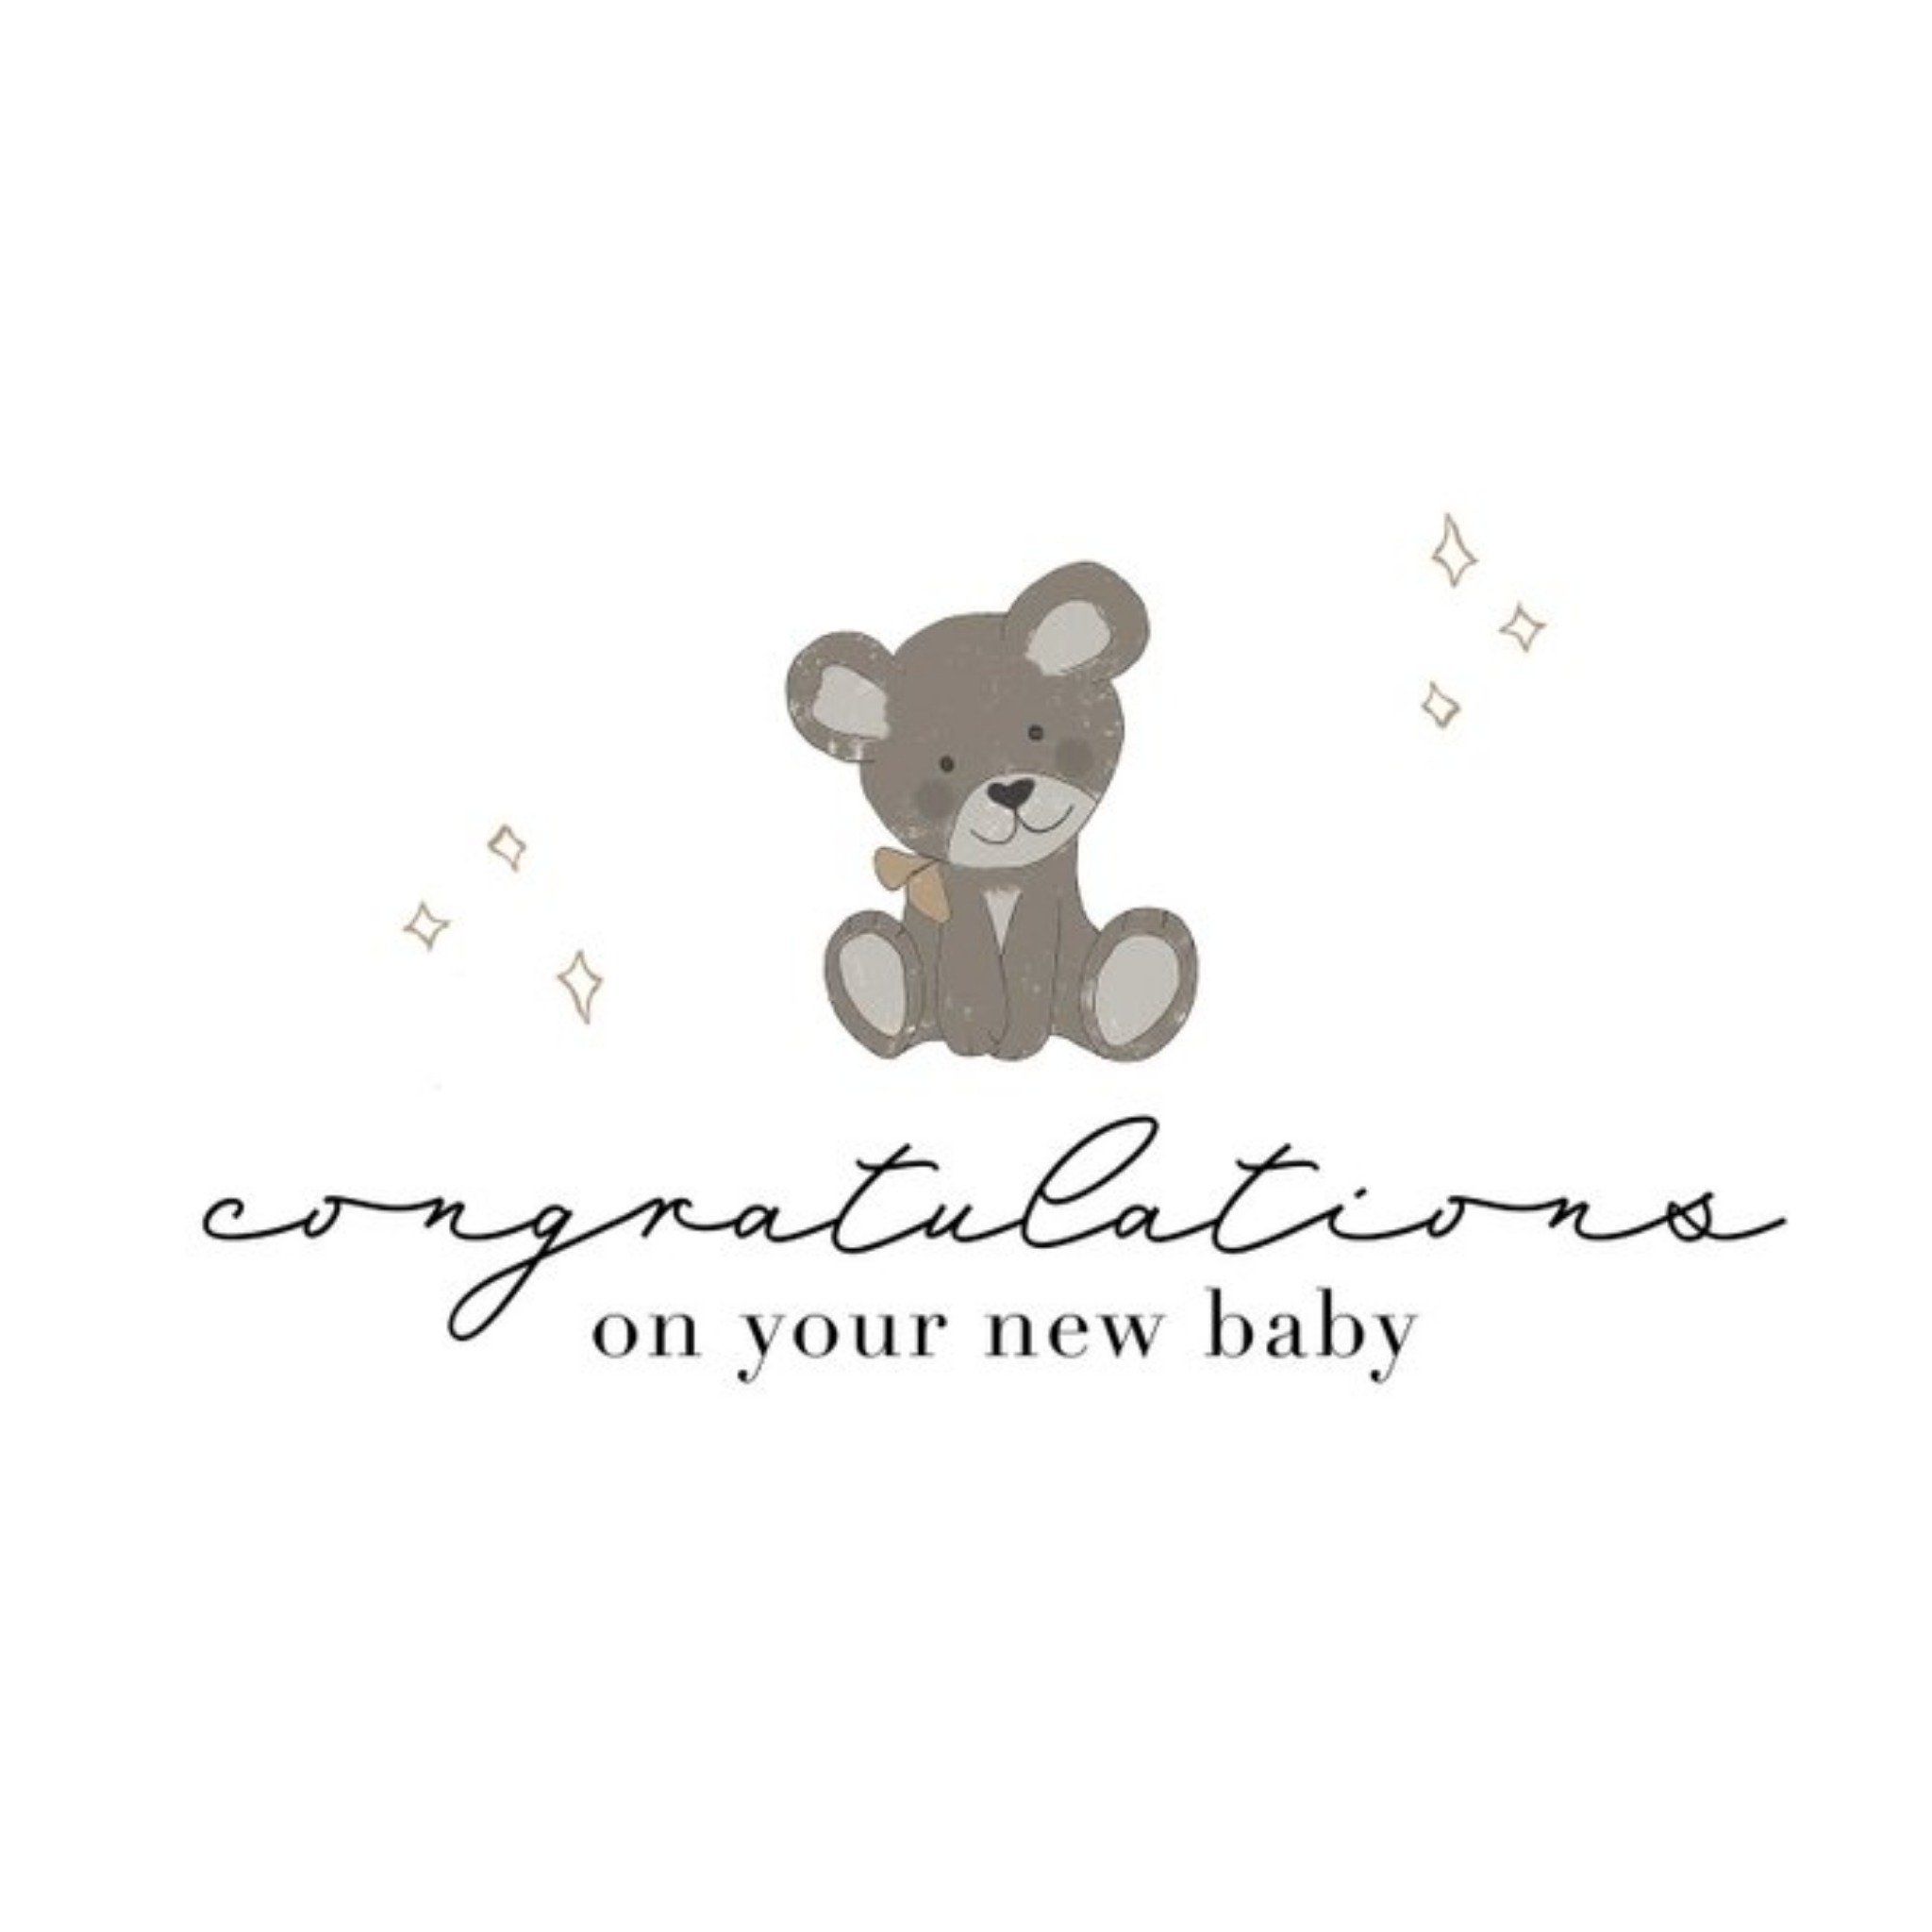 Moonpig Gabriel Neil Congratulations On Your New Baby Card, Square